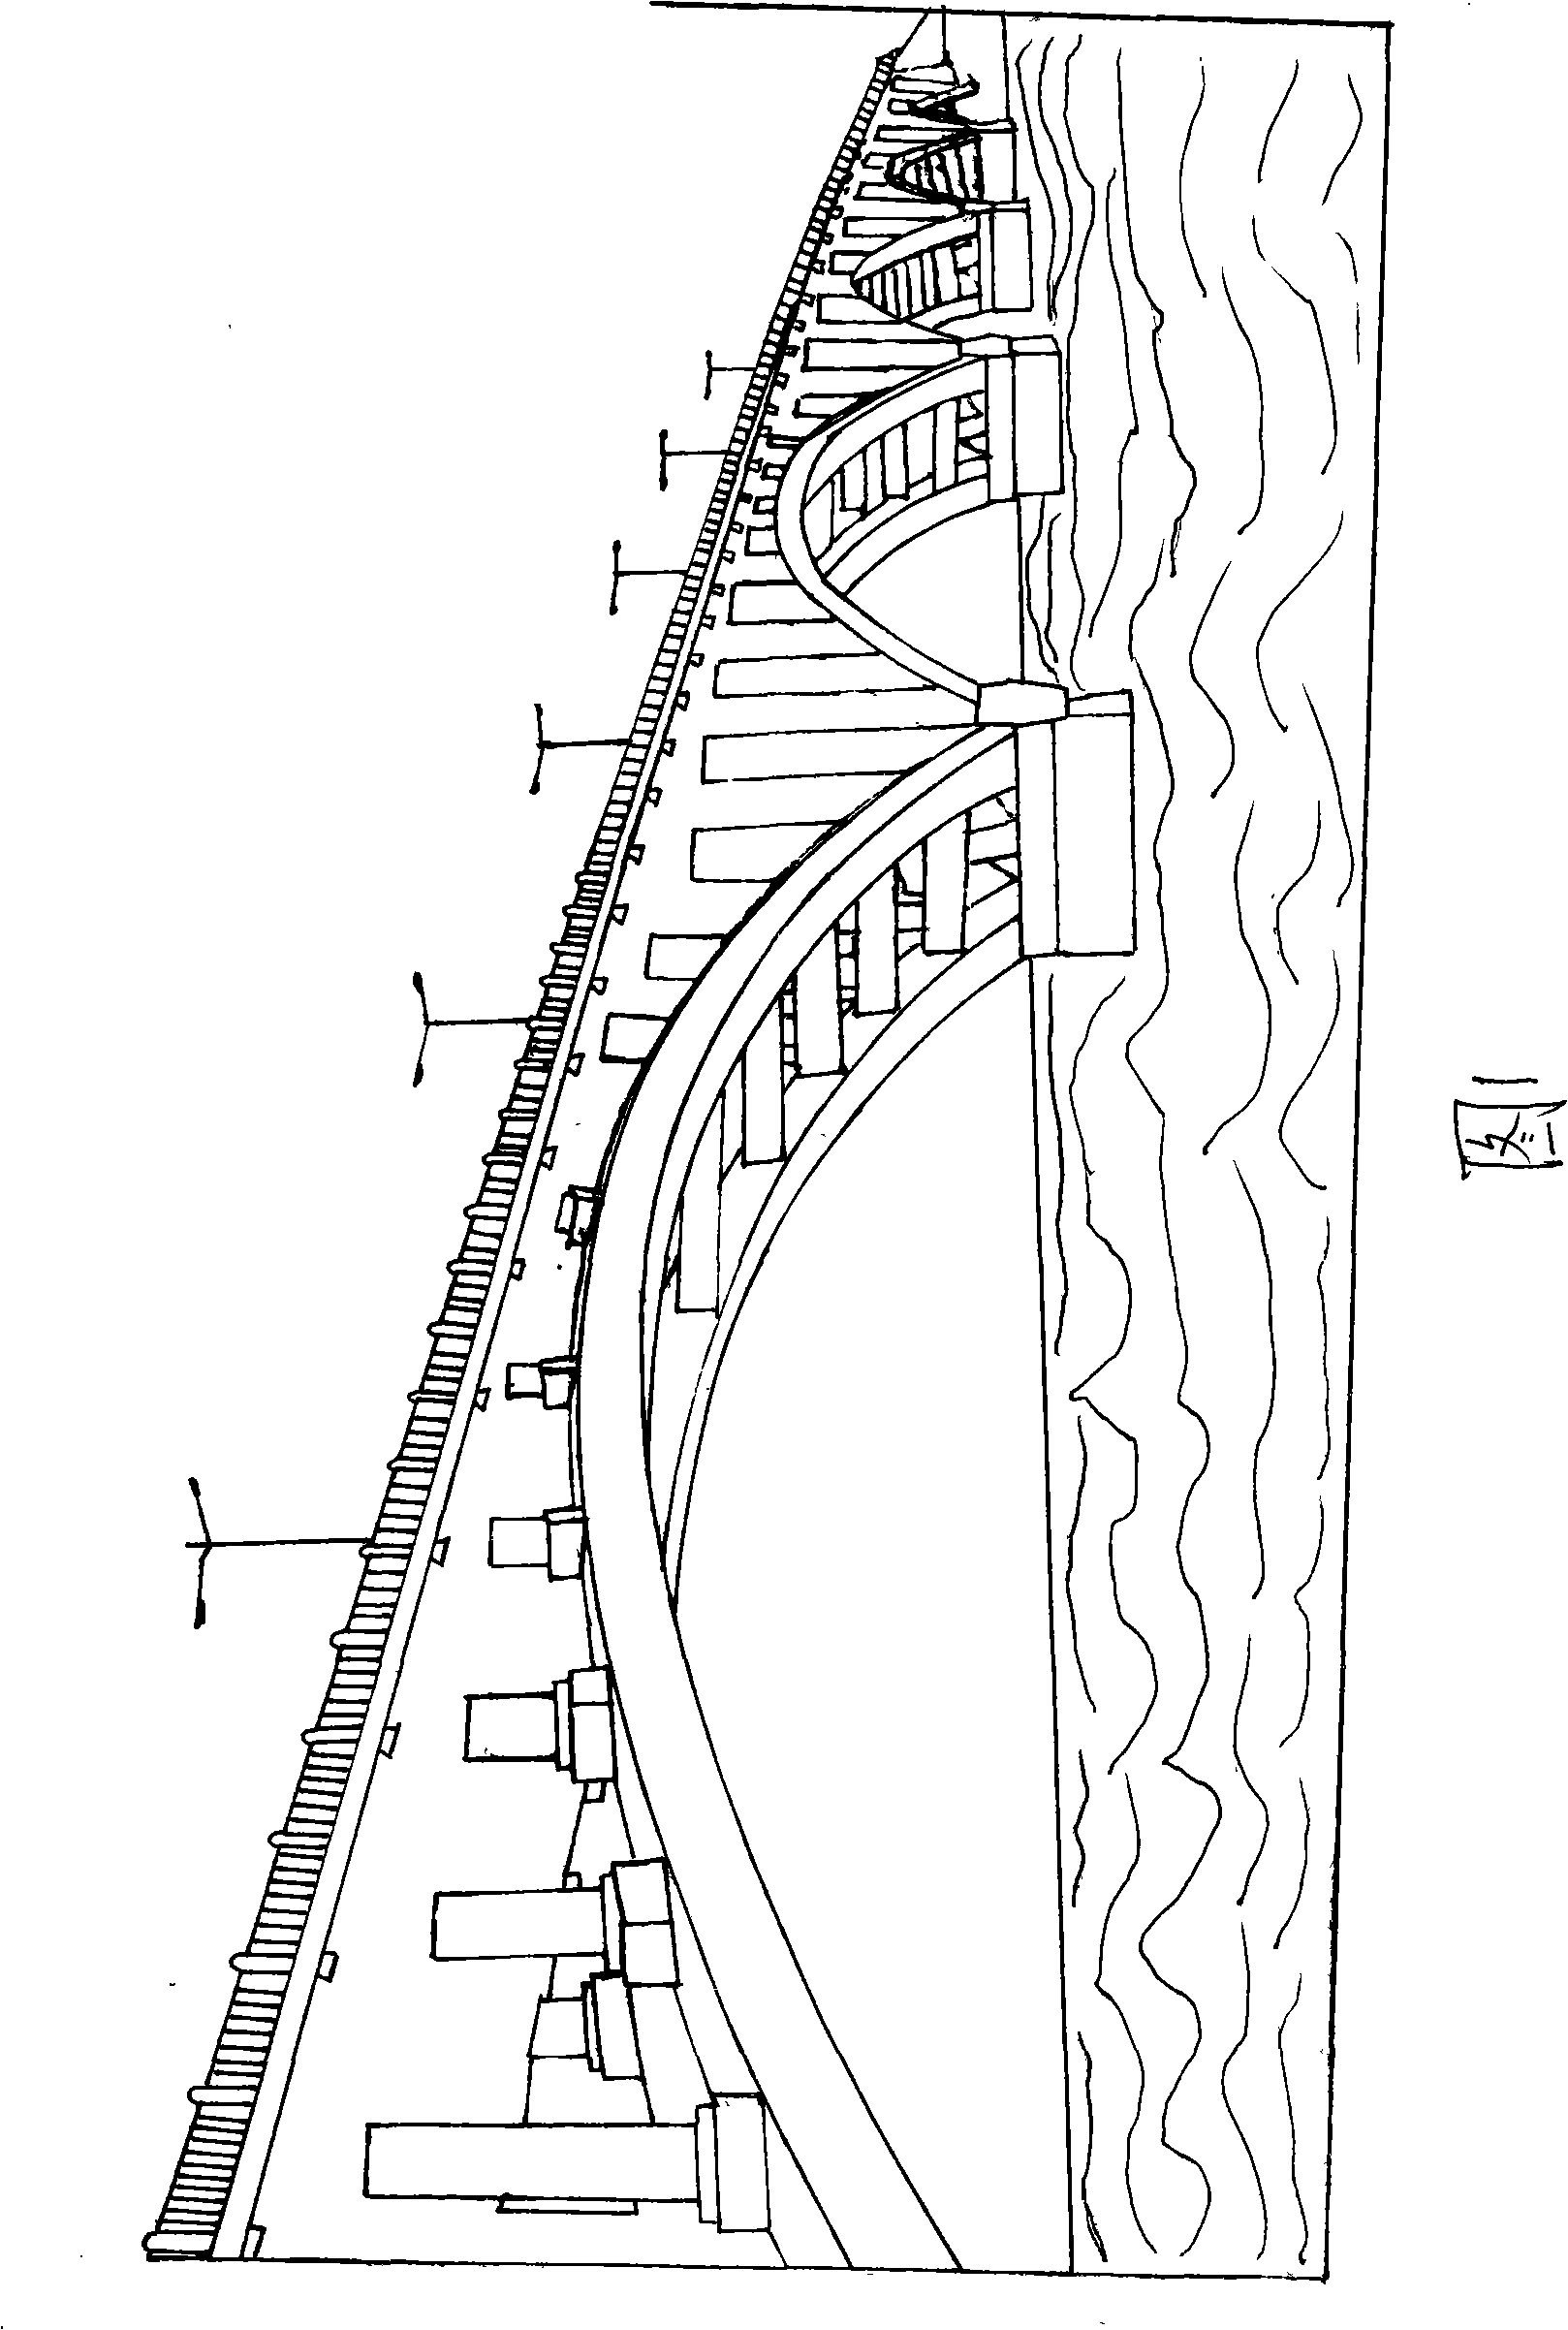 Method for dismantling arch bridge for protection